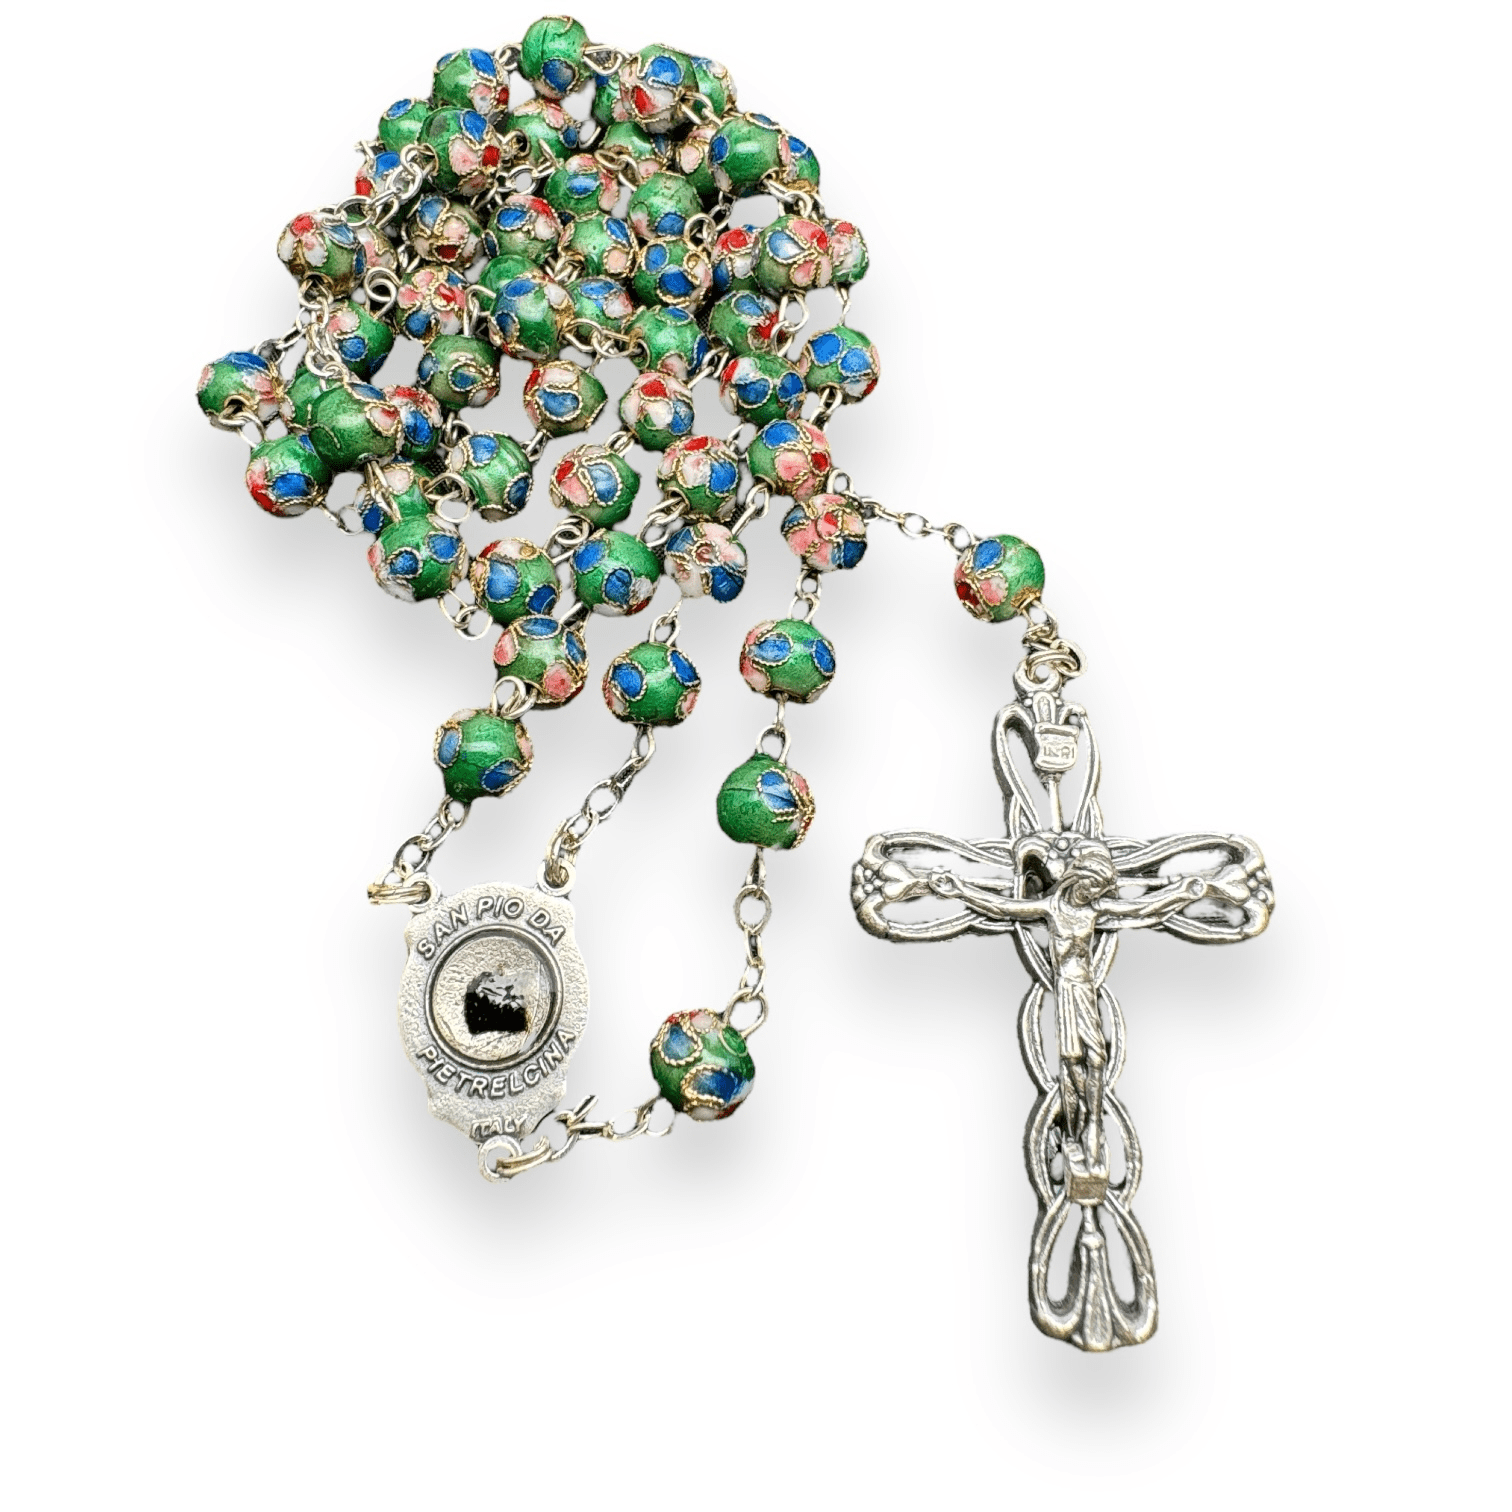 Catholically Rosaries St Father Pio Rosary Blessed By Pope with 2nd Class Relic